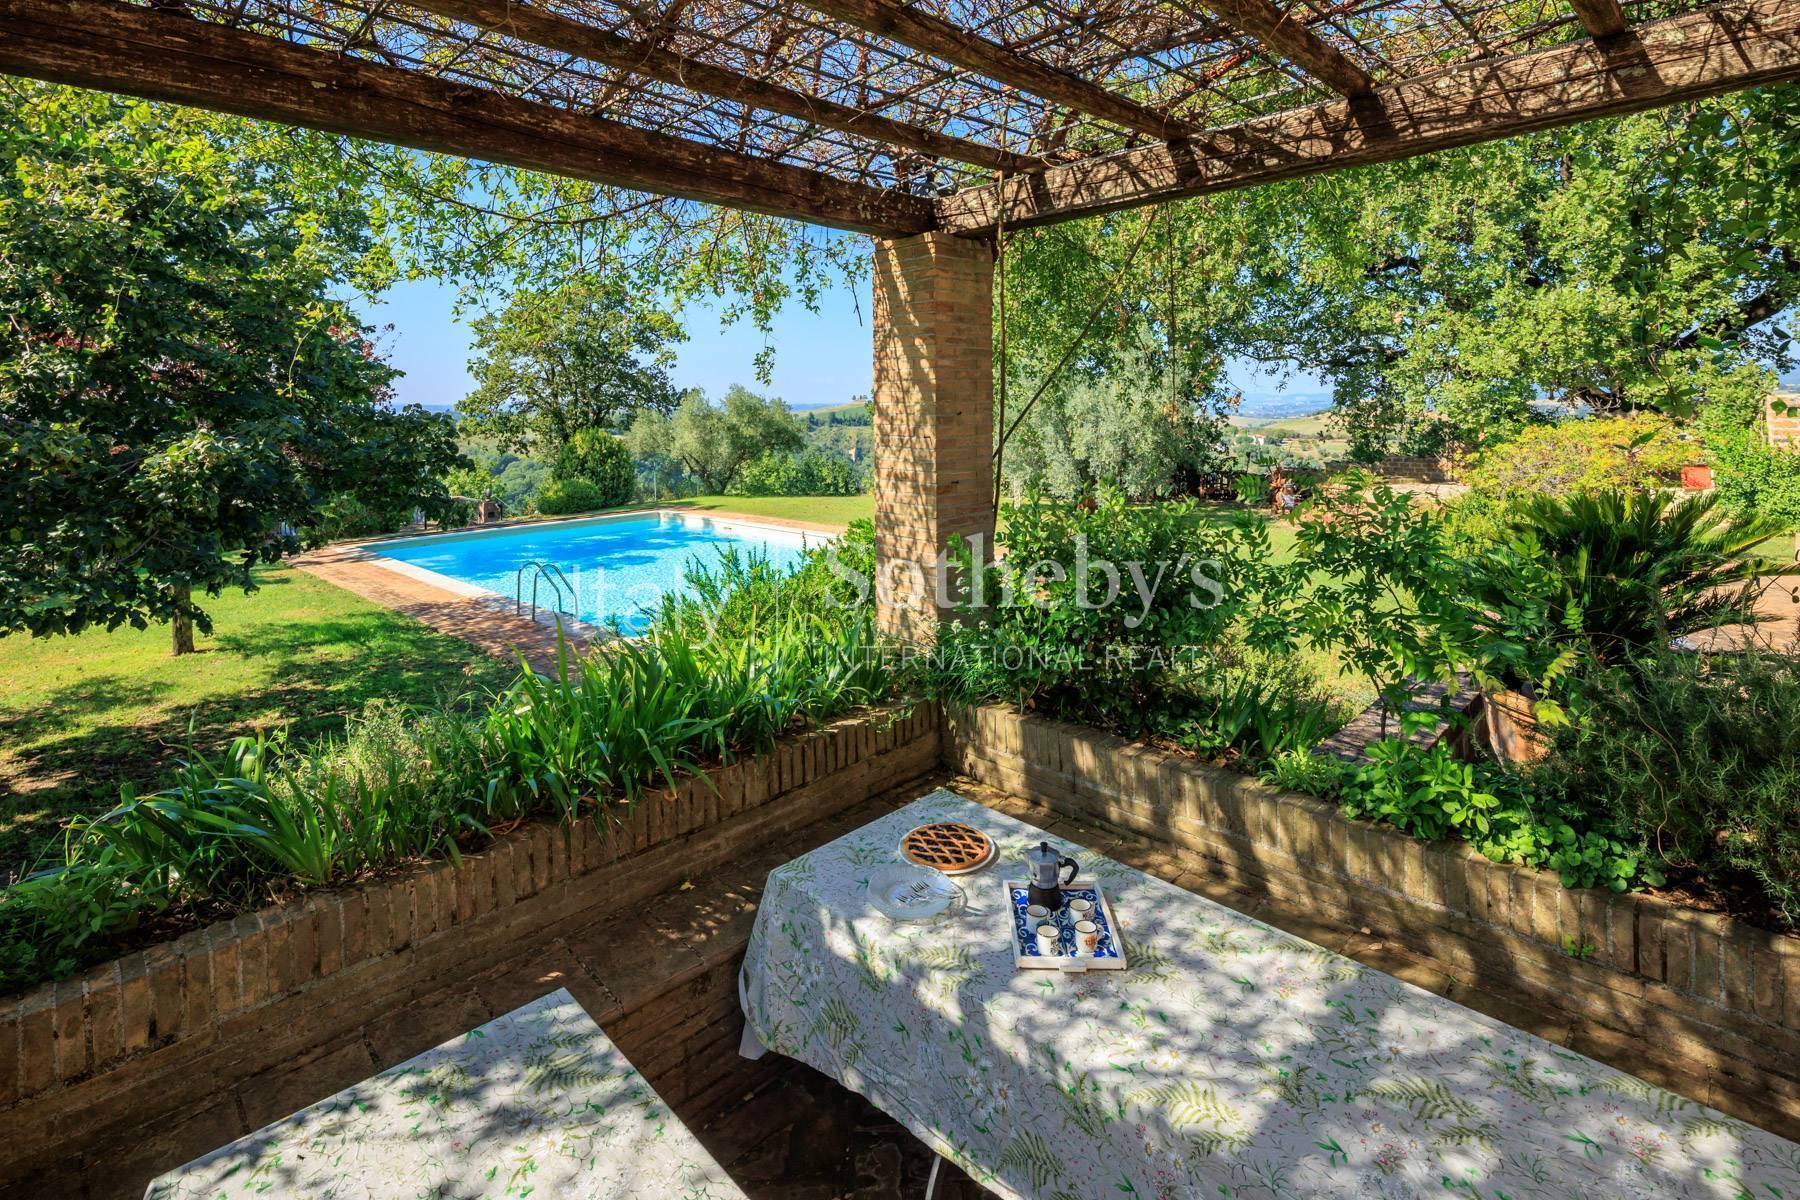 Villa with view and pool in Calvi dell' Umbria - 21